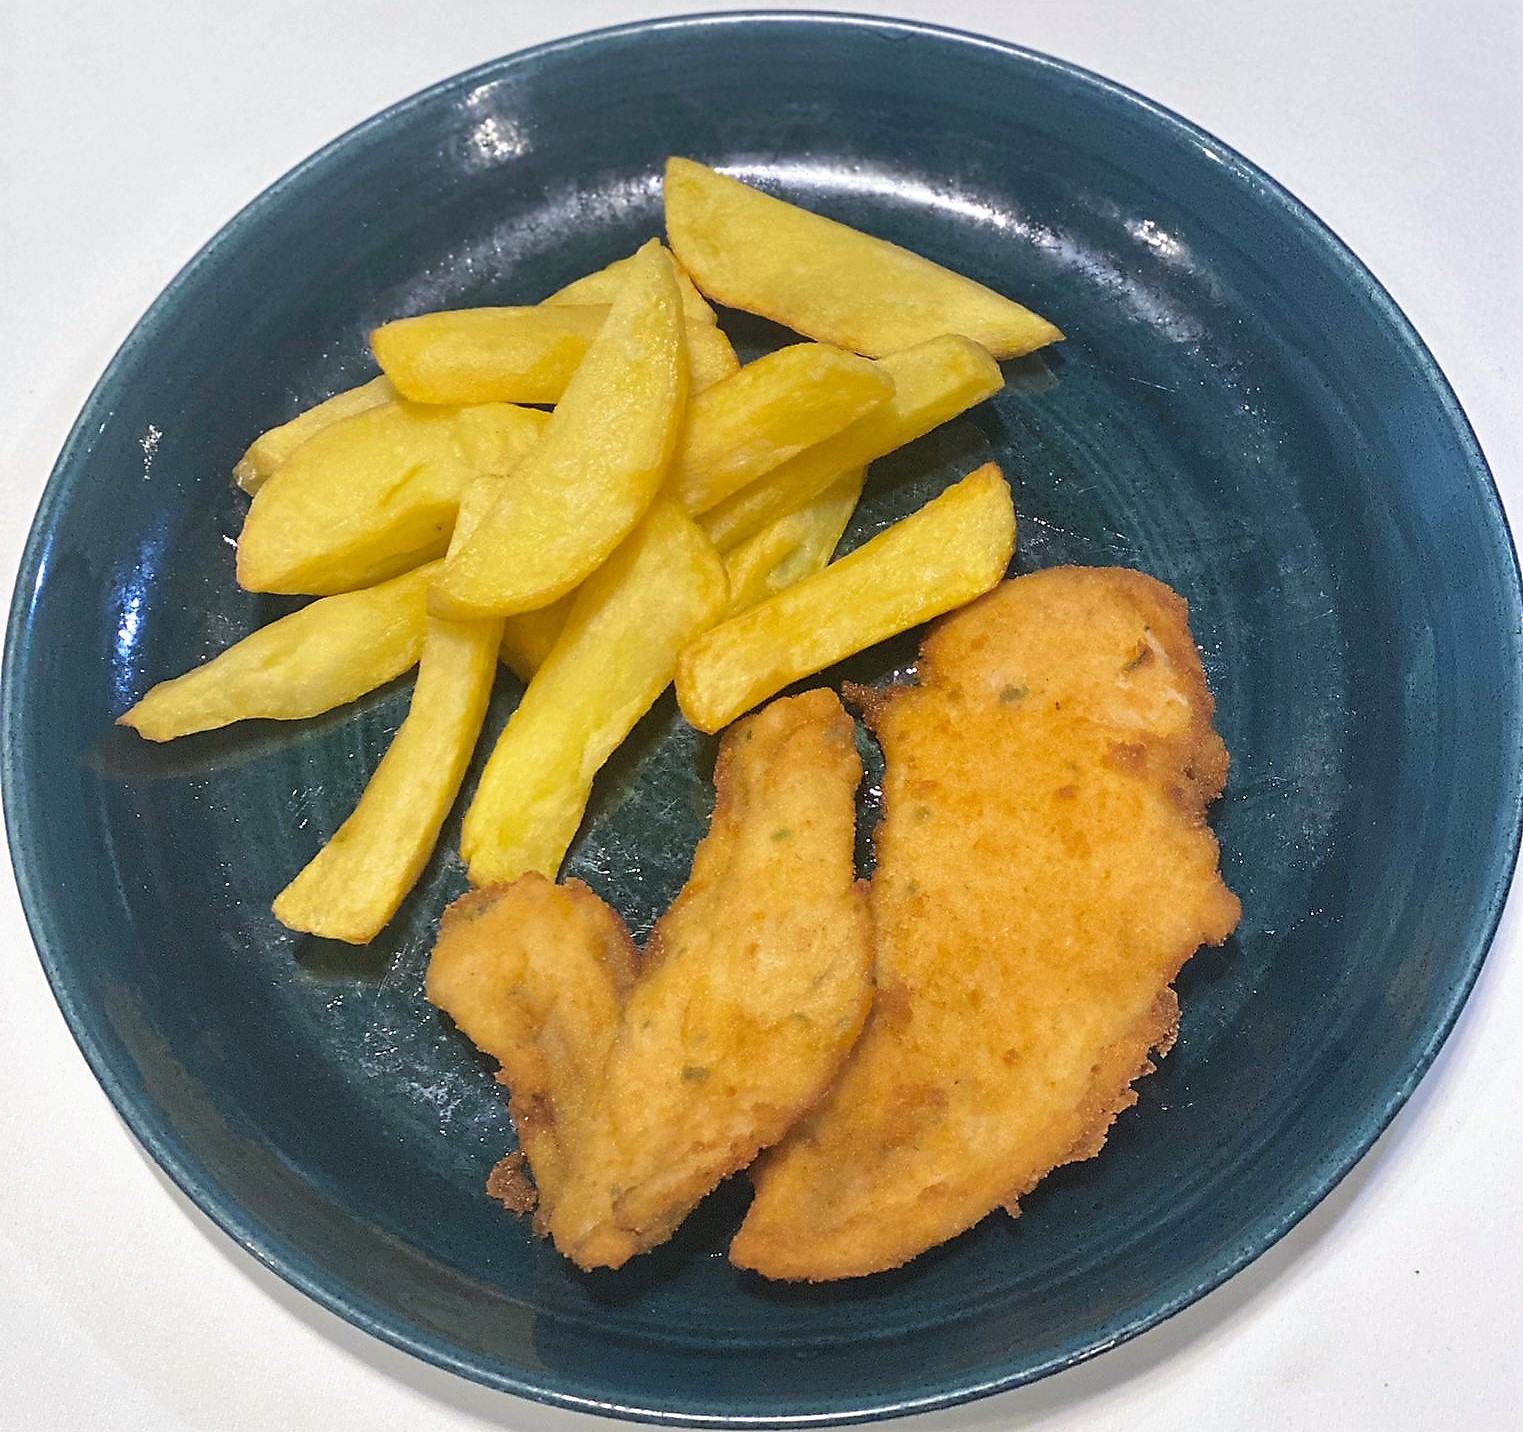 Plate of breaded chicken fillet with fries